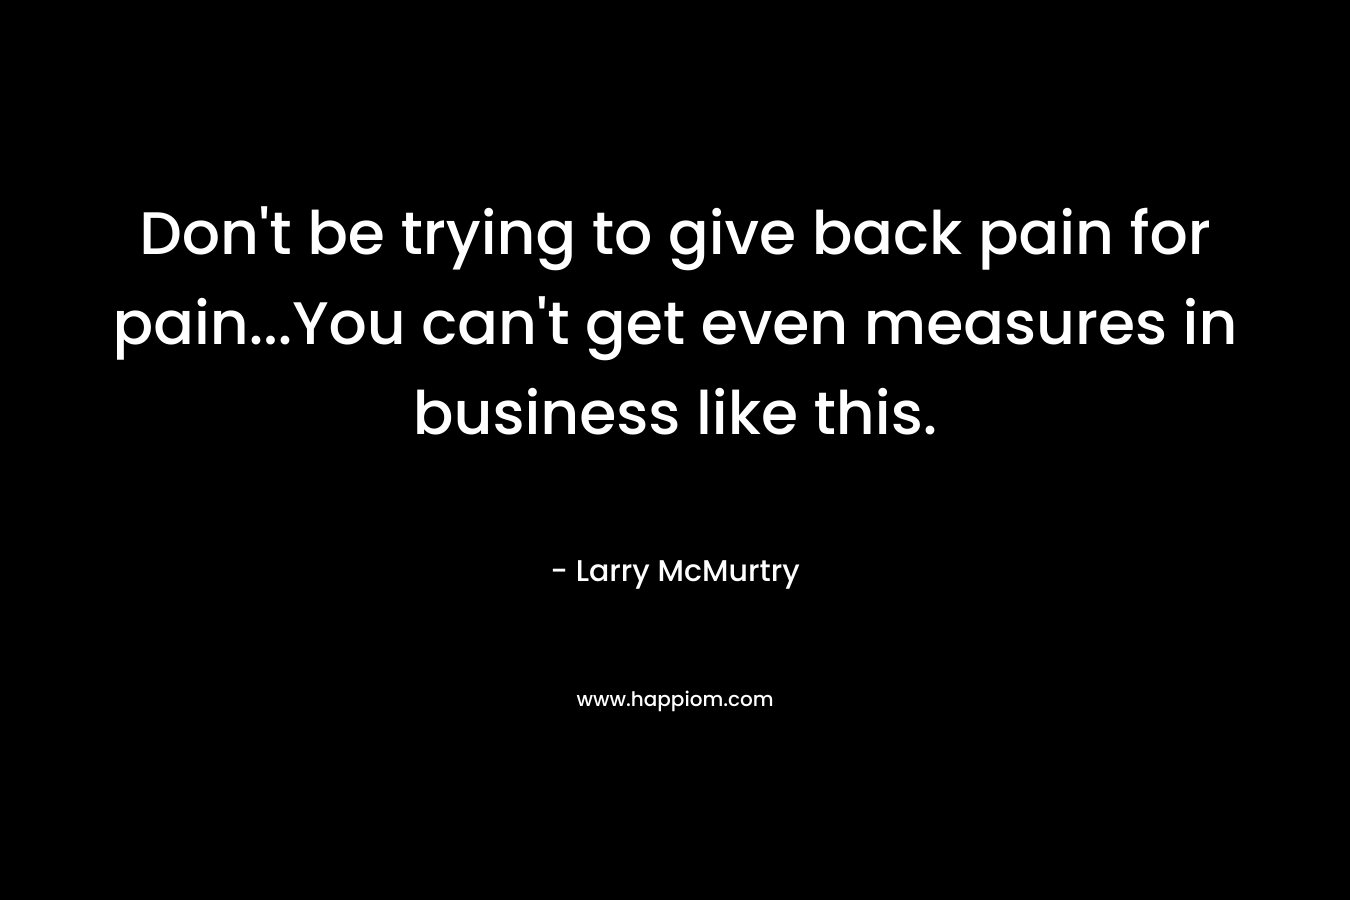 Don't be trying to give back pain for pain...You can't get even measures in business like this.